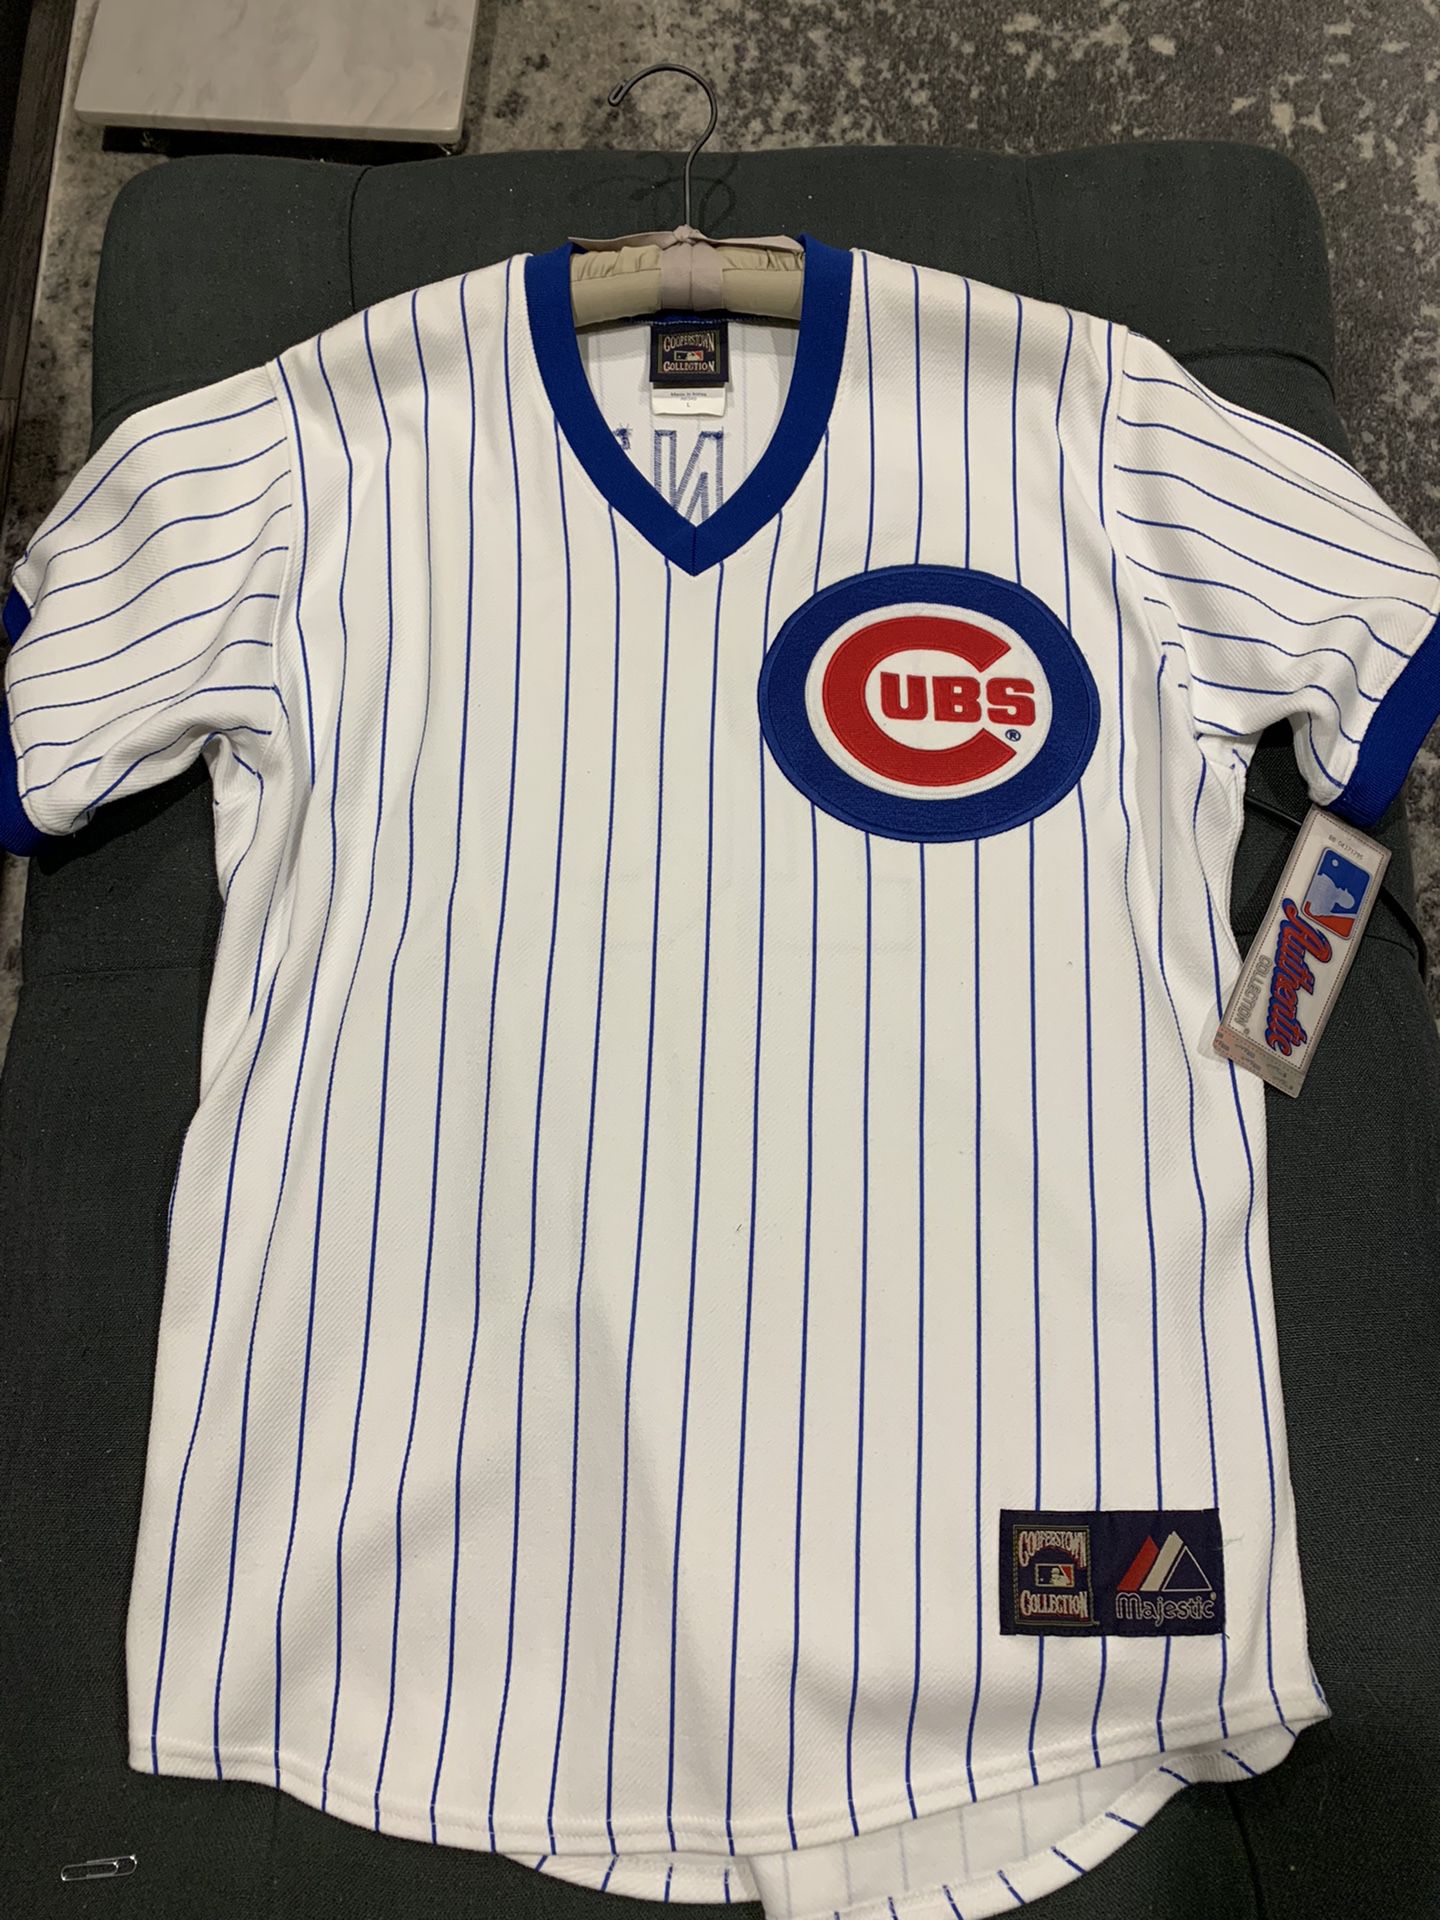 NEW CHICAGO CUBS Baseball JERSEY, MLB Chicago Cubs Jersey, TEAM APPAREL, Sports Collectors Team apparel, RON SANTO Chicago Cubs Jersey,  Size LARGE